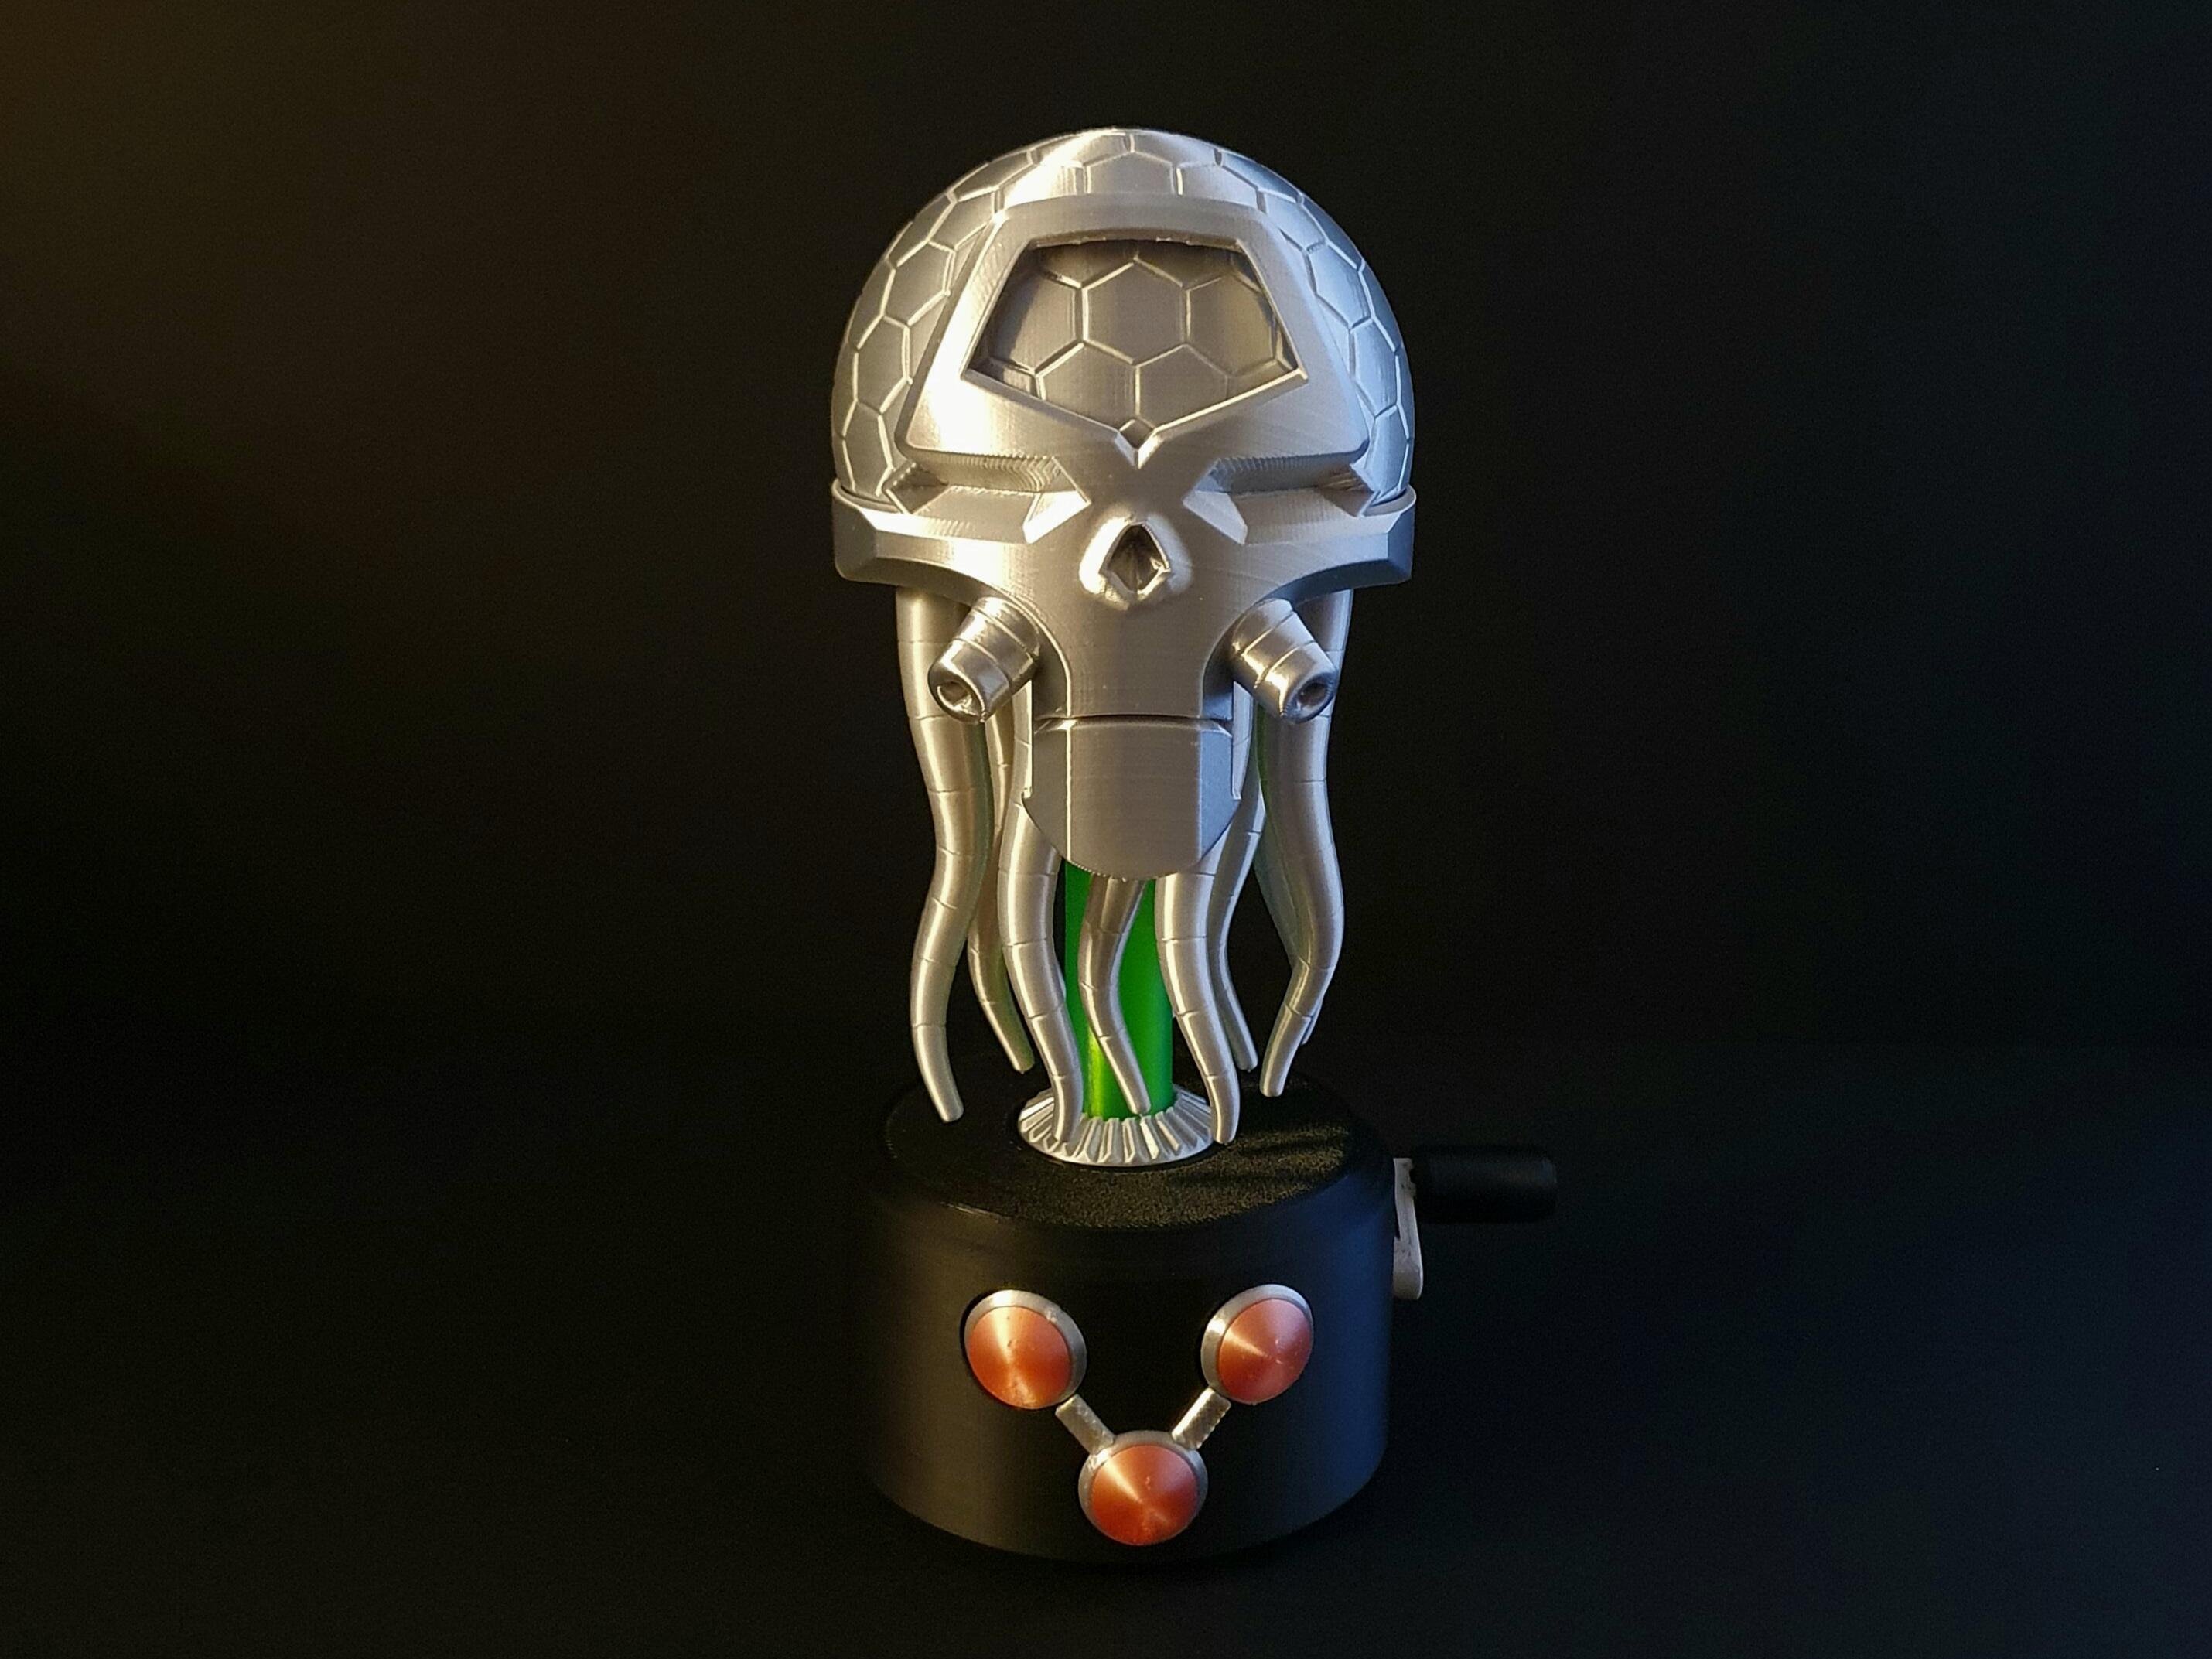 Brainiac Skull Ship - Classic version with moving tentacles